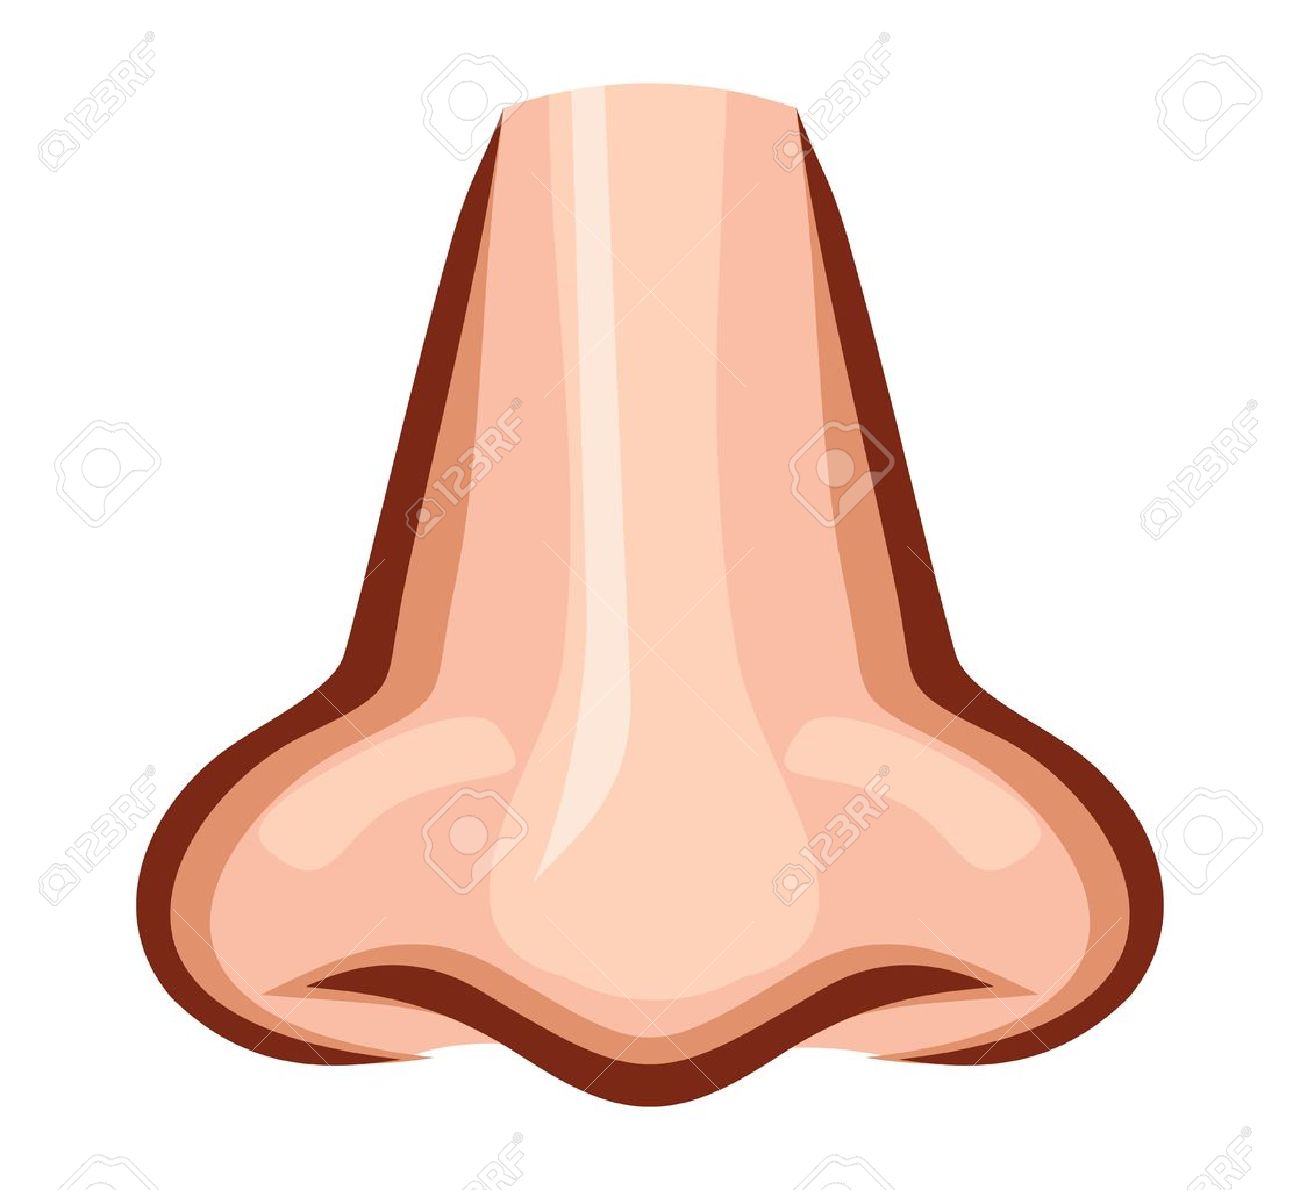 human nose clipart - Clipground